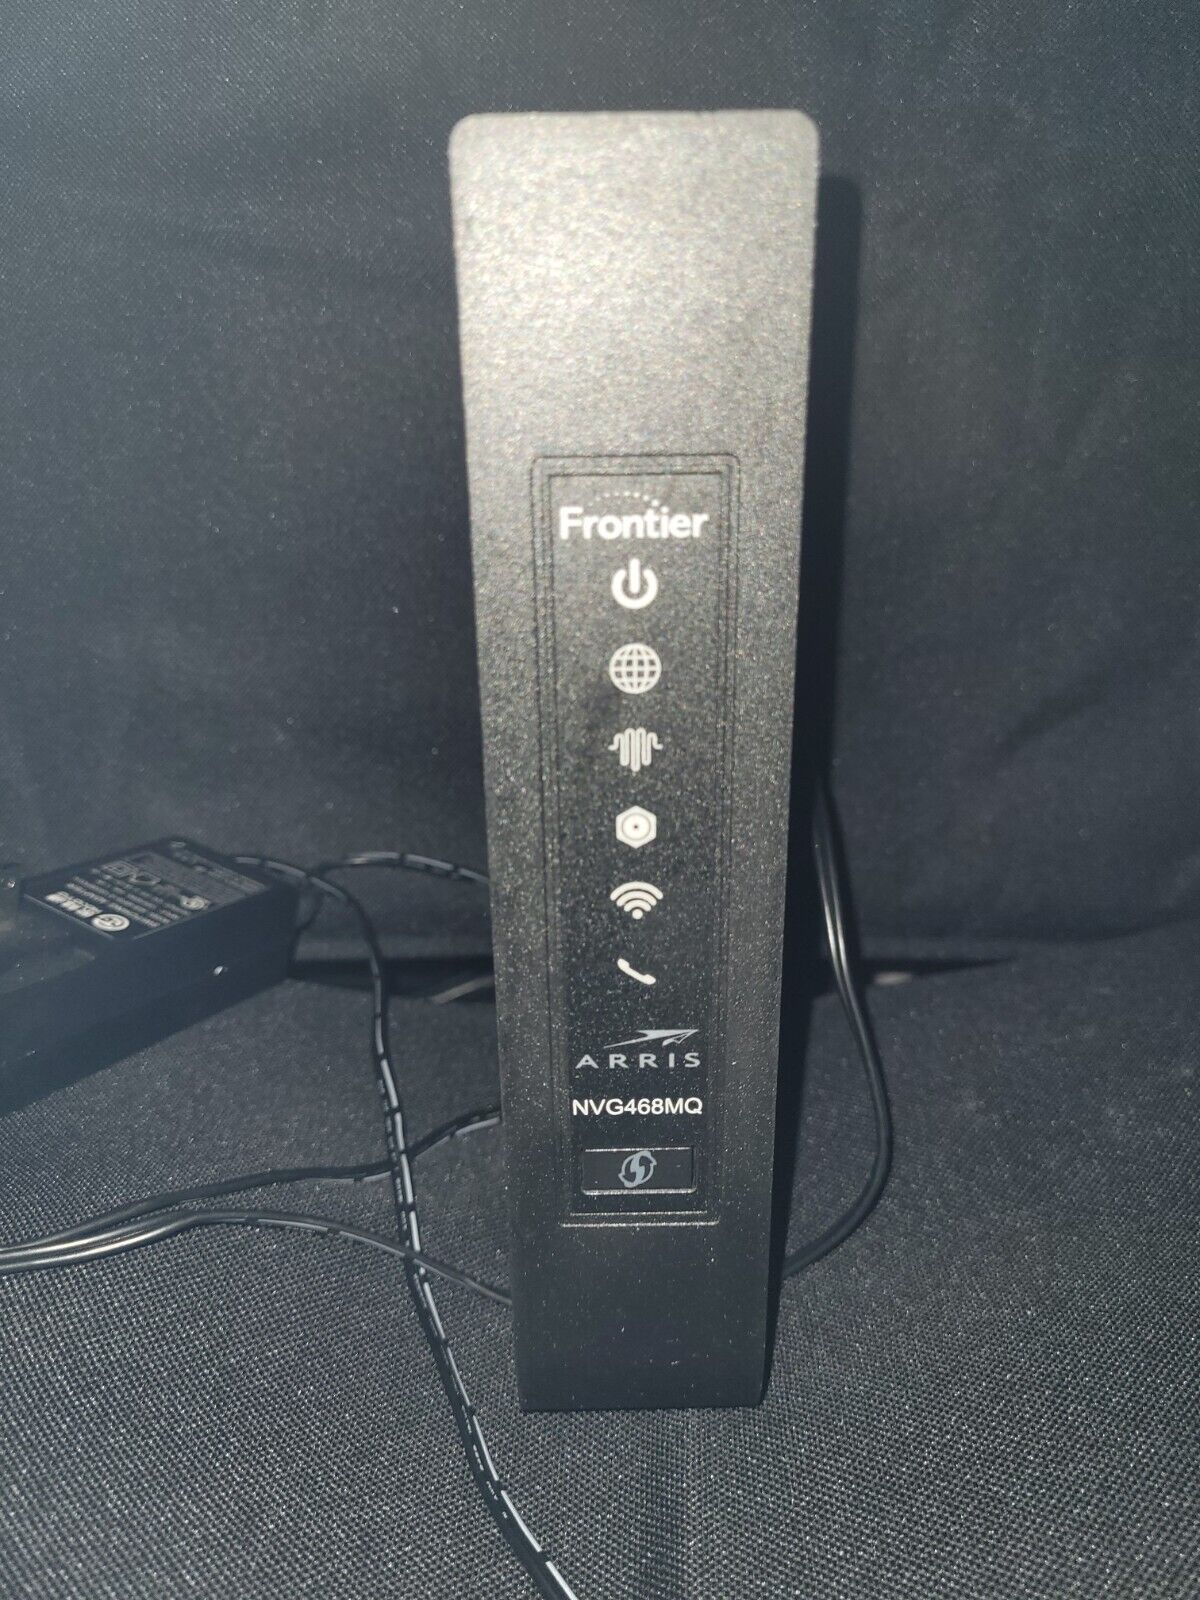 Arris Frontier Ethernet Gateway Wi-Fi Modem Router NVG468MQ with Cat5